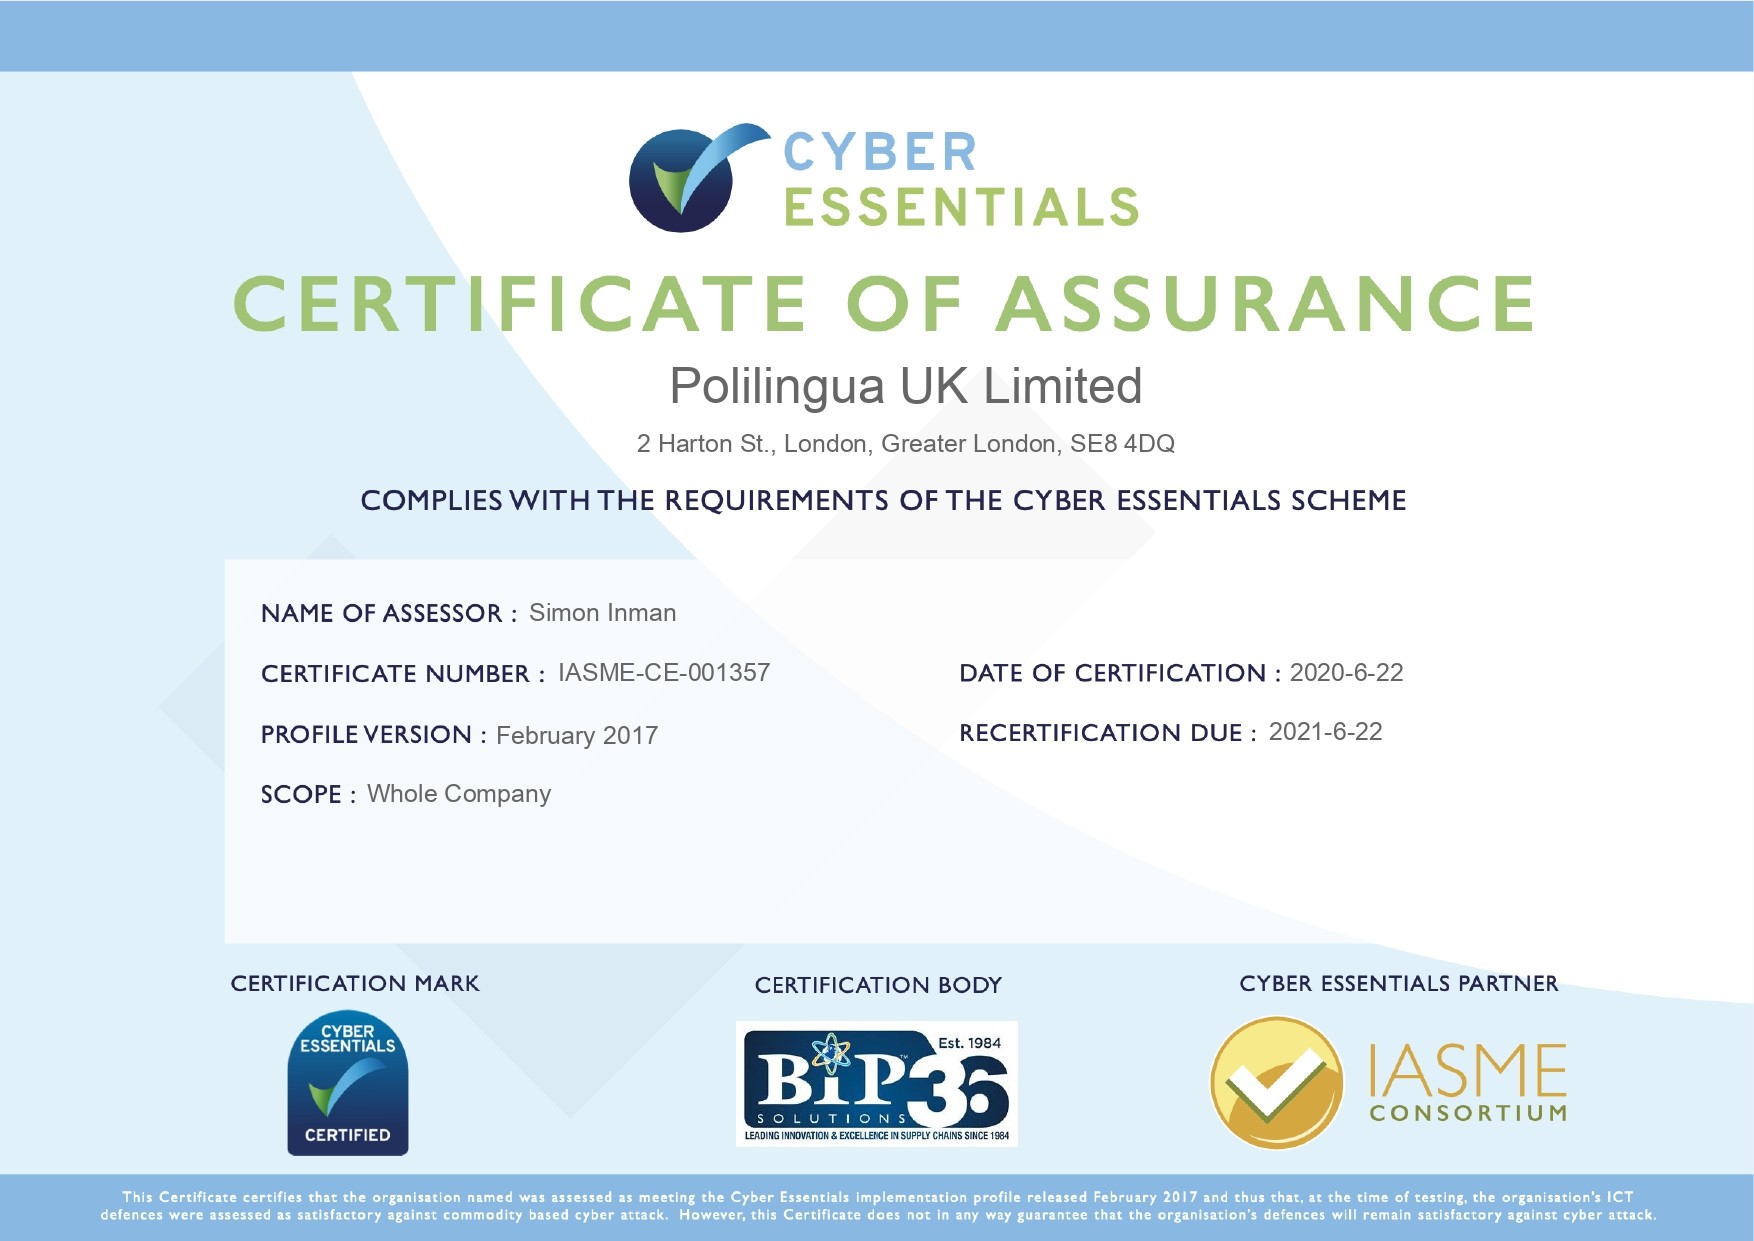 Cyber Essential Certified